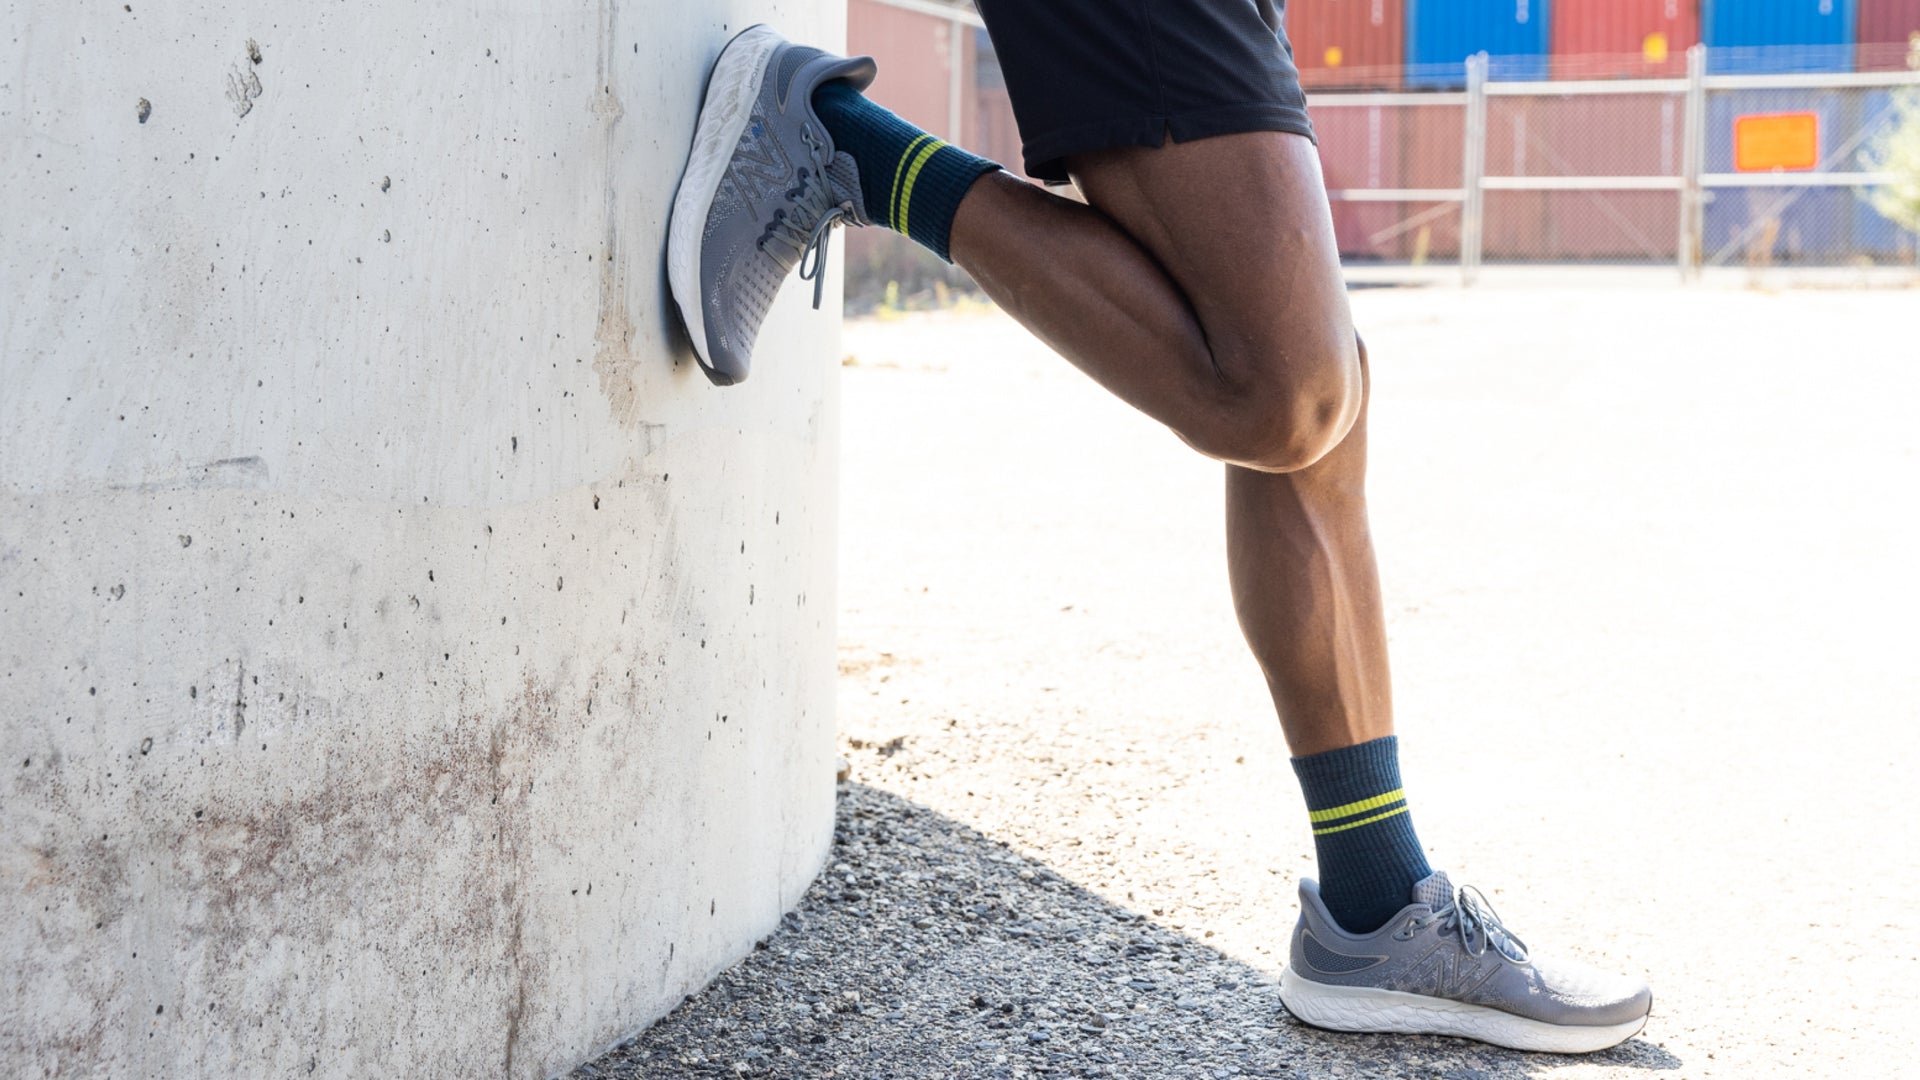 Model standing with one foot back to the wall wearing the Men's Element lightweight athletic crew sock